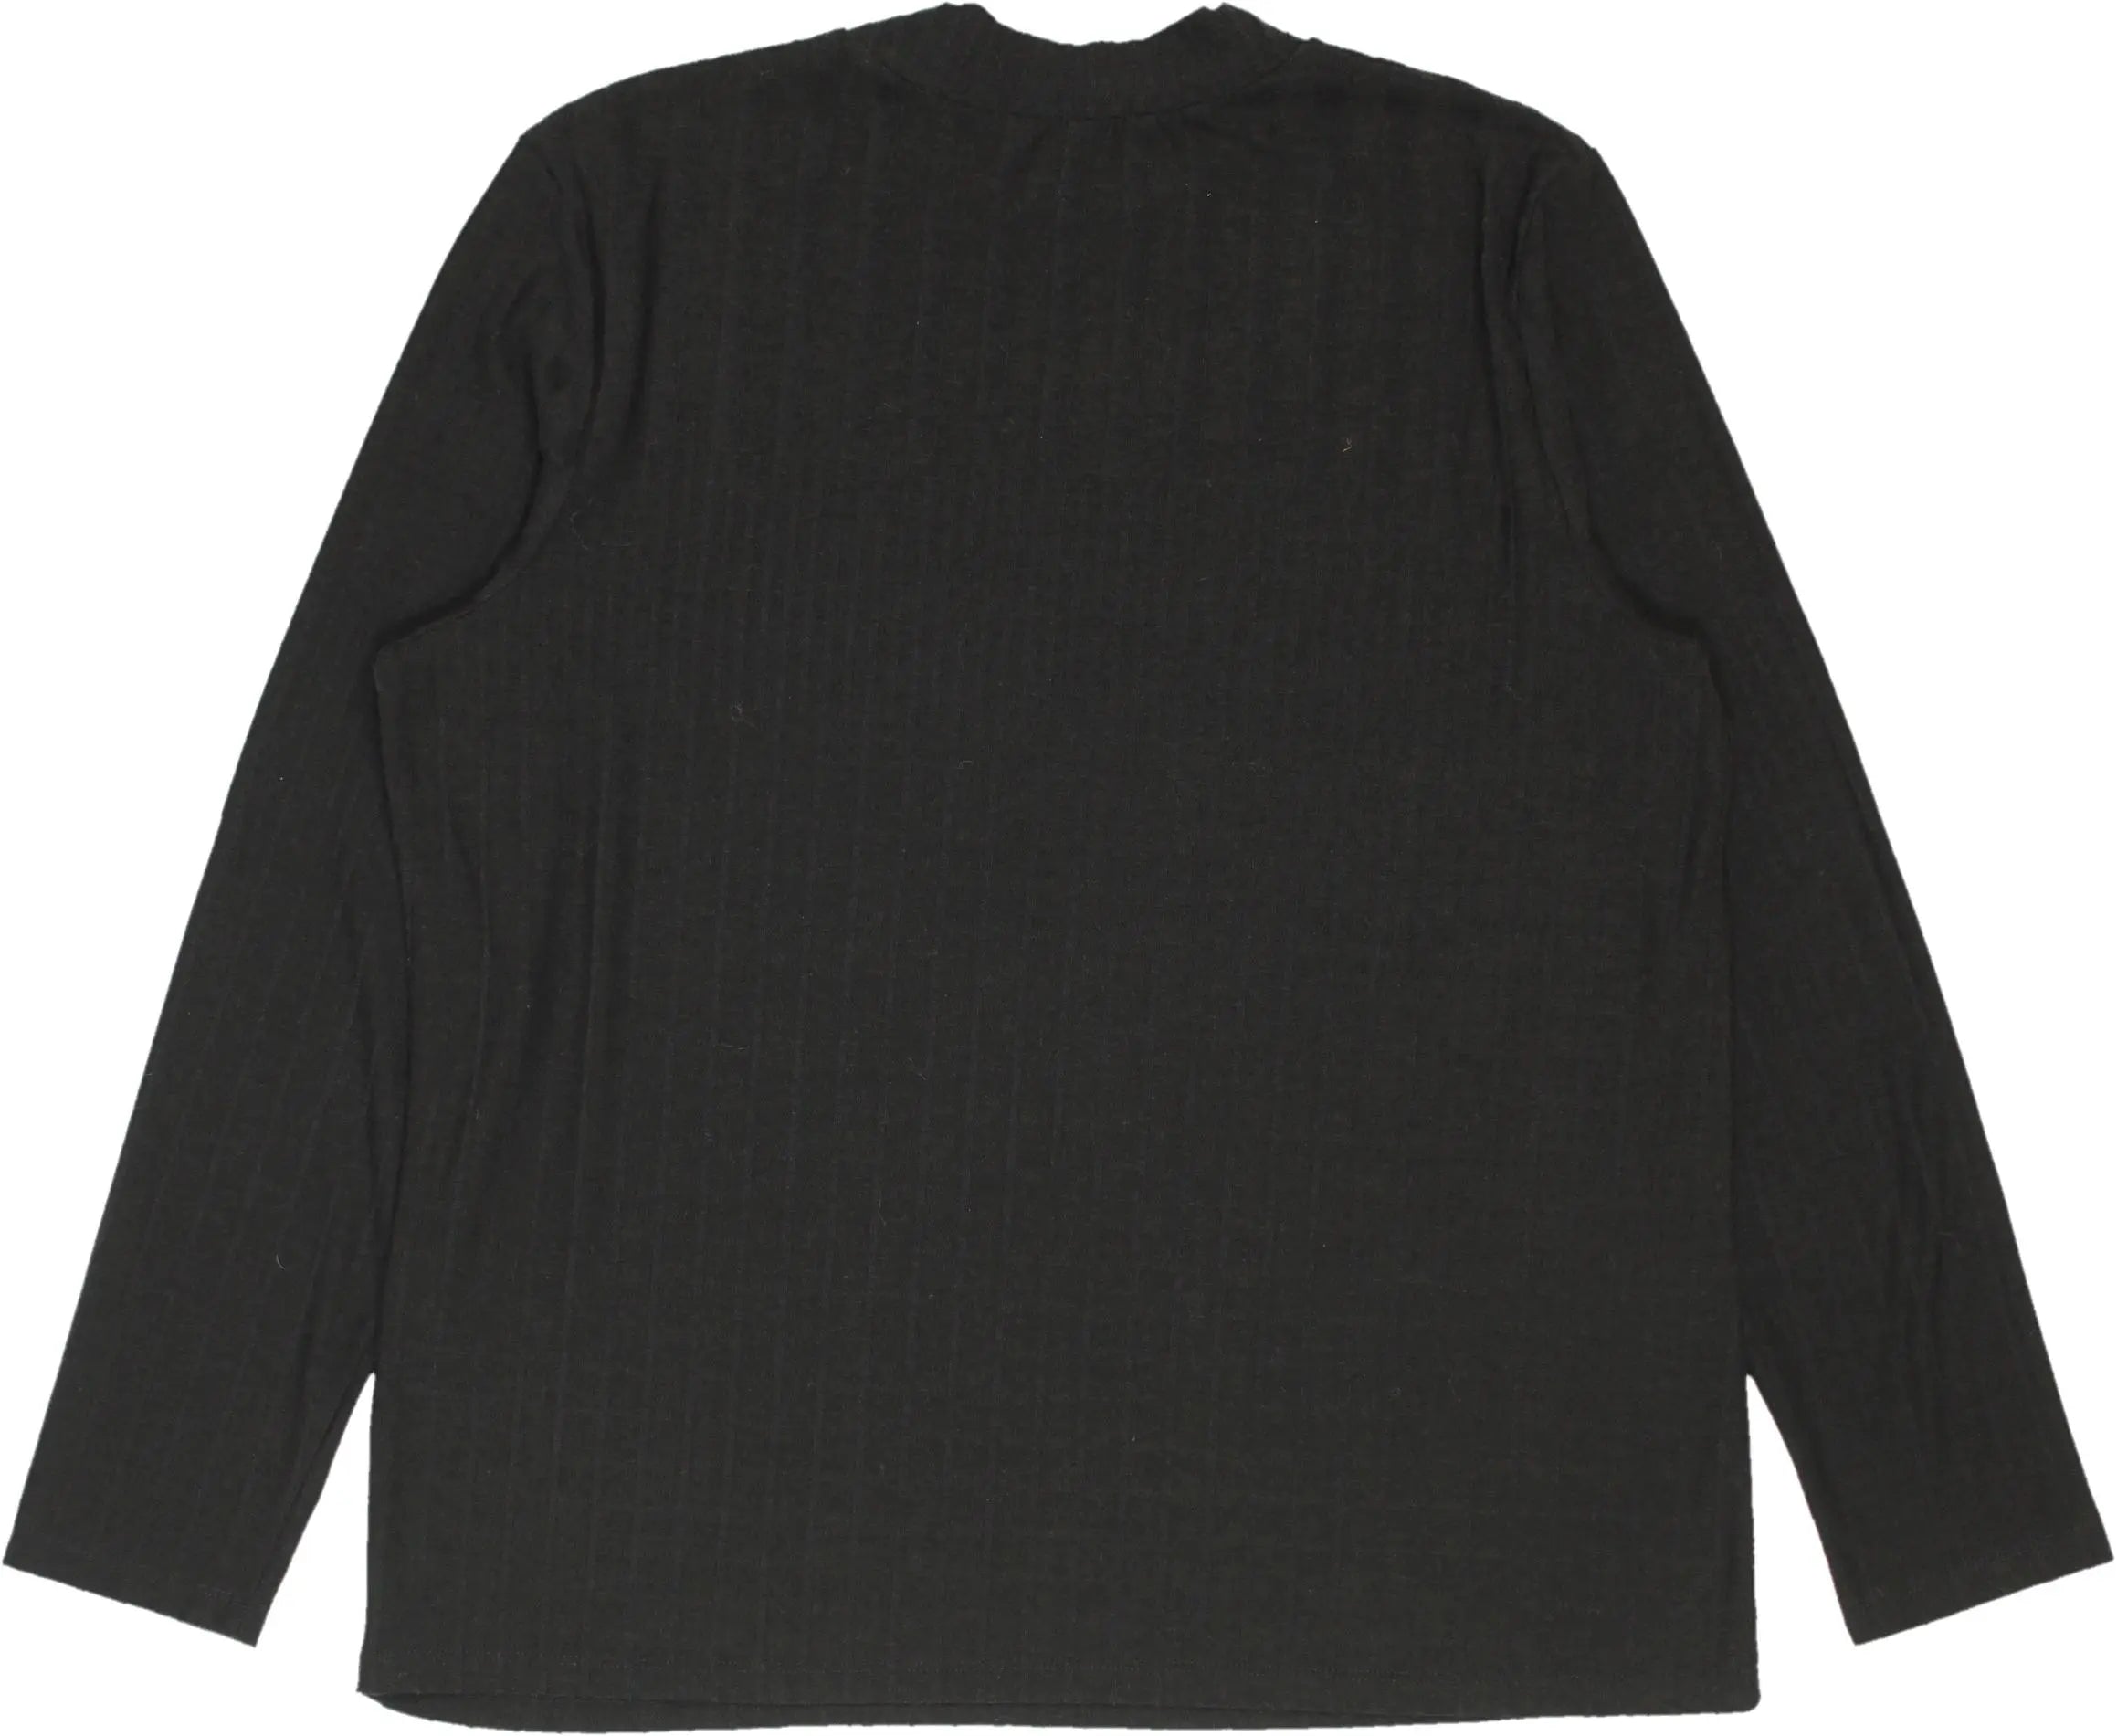 C&A - Black Long Sleeve Top- ThriftTale.com - Vintage and second handclothing